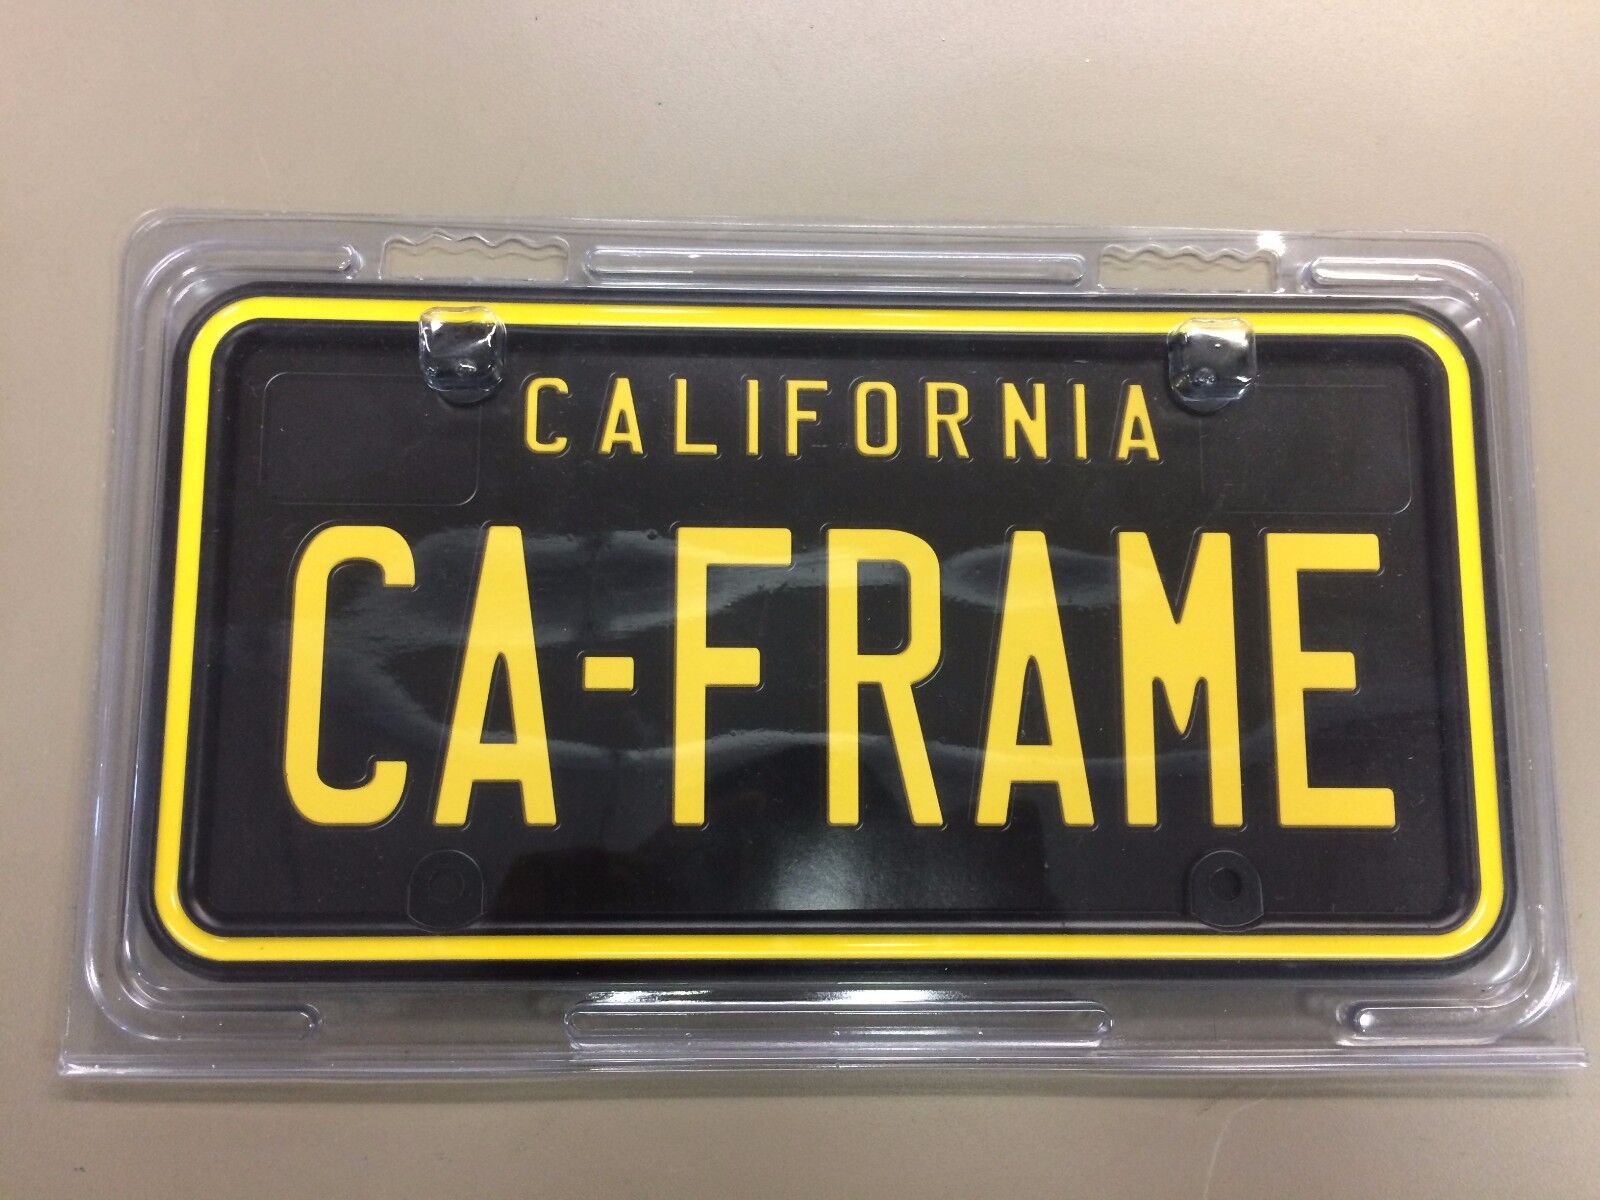 NEW Black and Yellow California License Plate Frame 10162